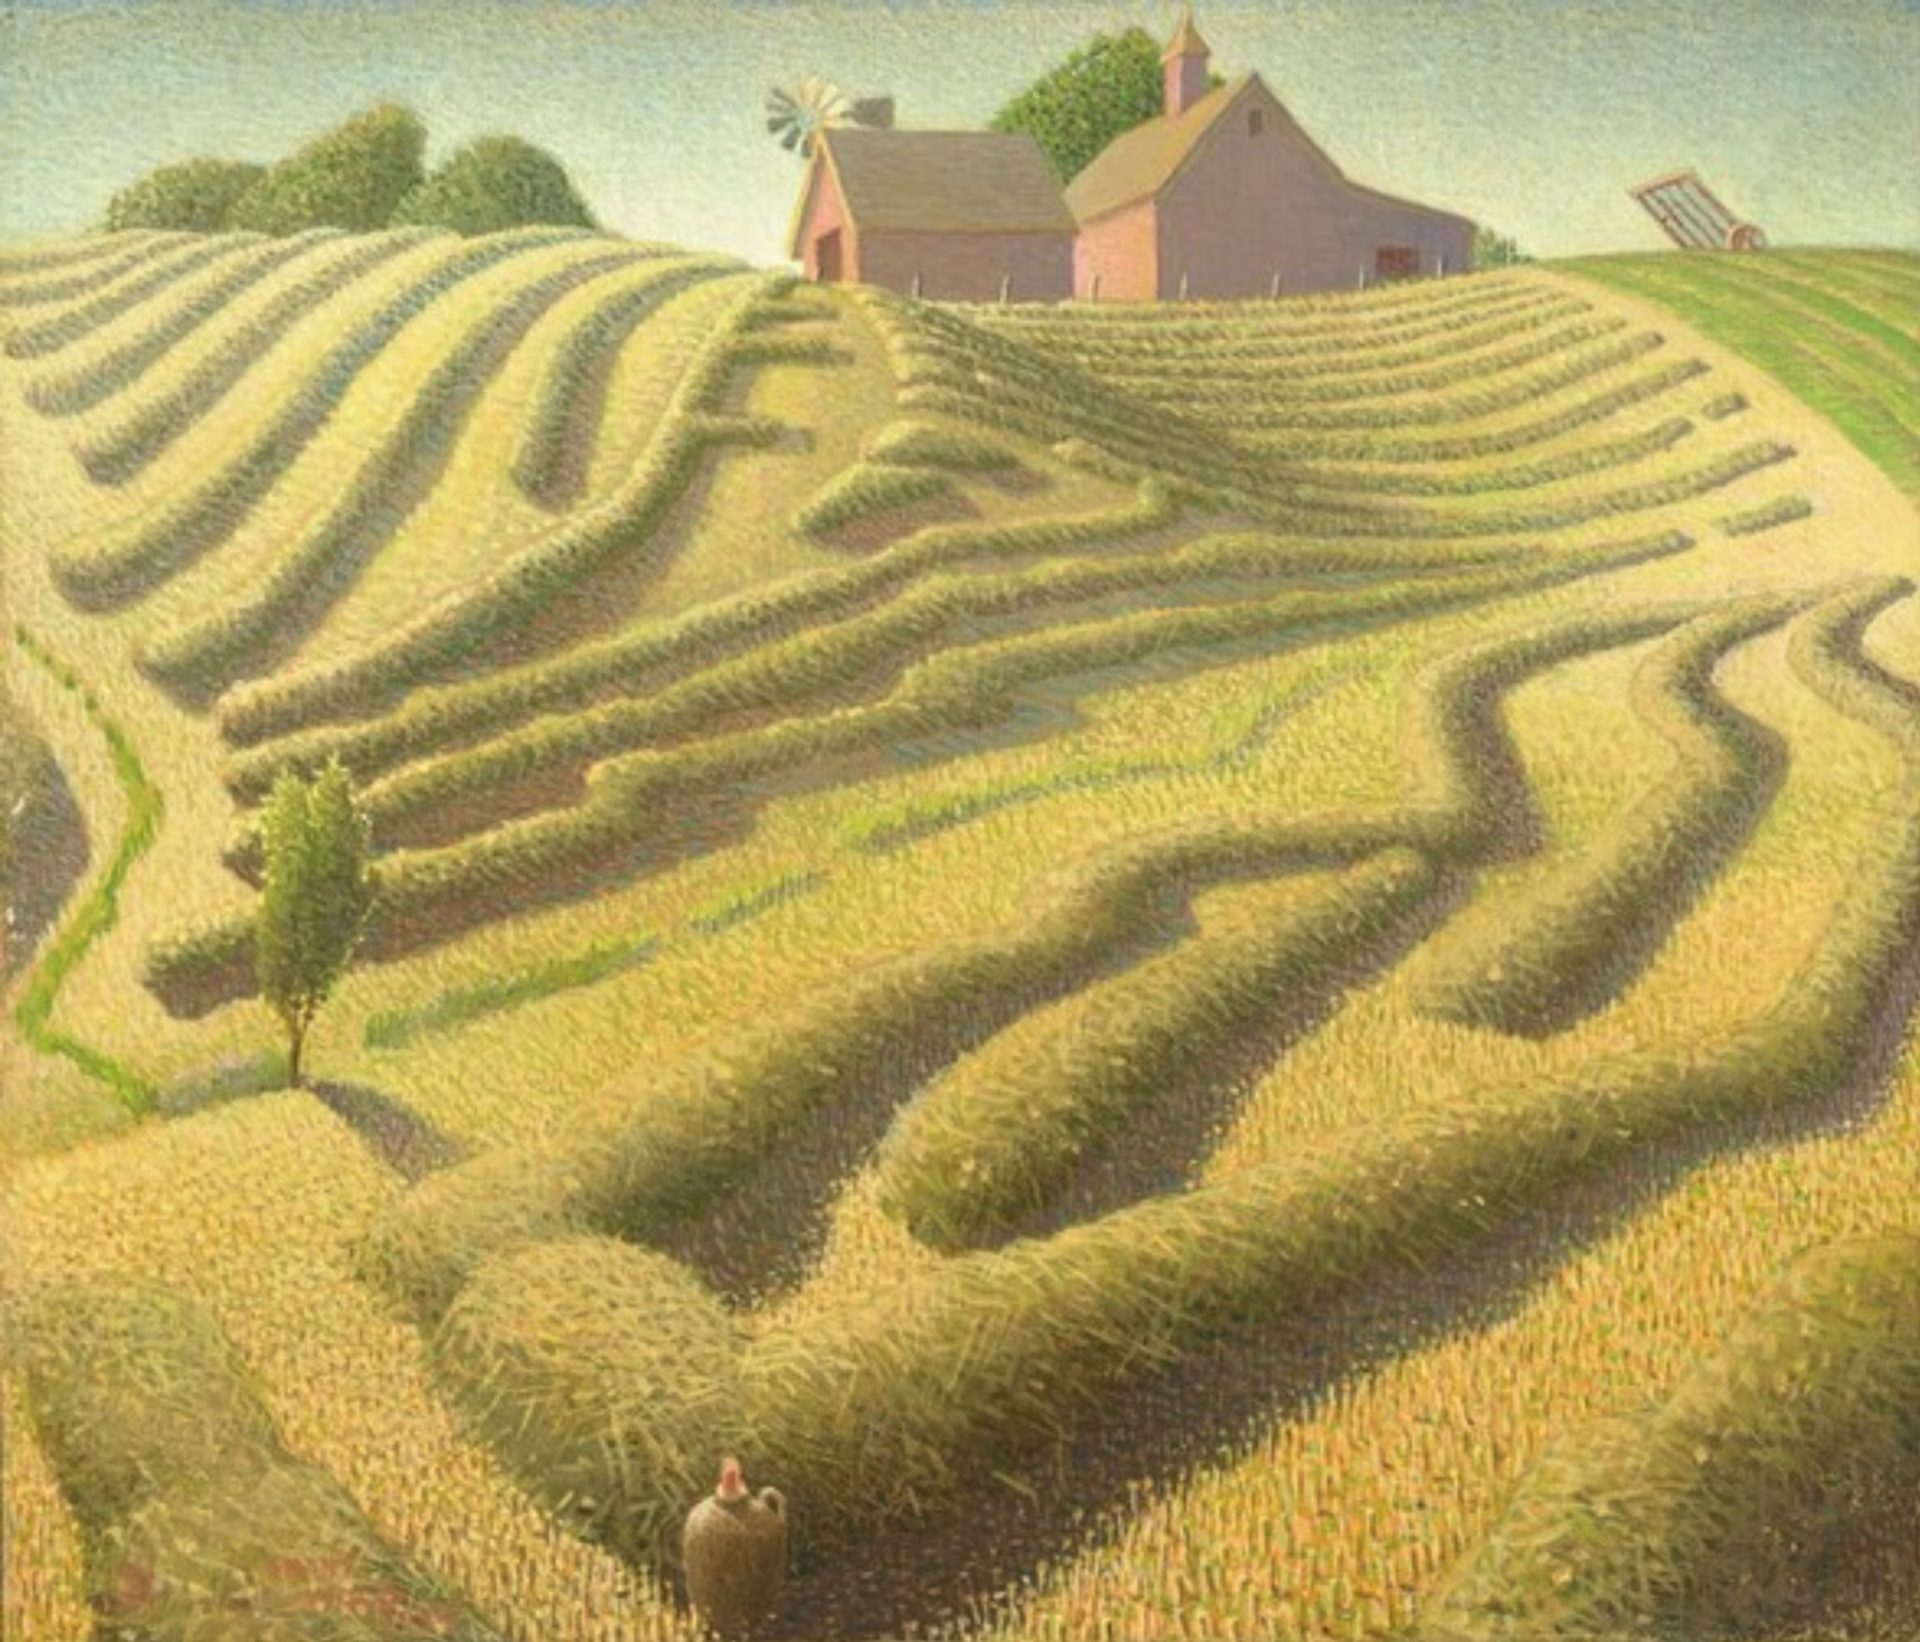 The almost square canvas depicts a rolling, verdant farmland under a clear blue sky, as seen from a low vantage point. The field, drenched in sunlight, is filled with stylized, golden-green haystacks meticulously arranged in roughly parallel rows. A young, solitary tree is painted near the lower left corner. At the top of the hill, two terracotta-red barns with tan roofs are visible, silhouetted against the sky. The larger barn features a higher pitched roof and a lantern-shaped cupola, while a fan-like weathervane tops the smaller structure. Farm machinery is parked in the field at the top right. At the bottom center, a brown ceramic jug with a red stopper is nestled between the rows of haystacks, adding a touch of still life. The painting captures the rural beauty and tranquility of a farm scene during the haying season.